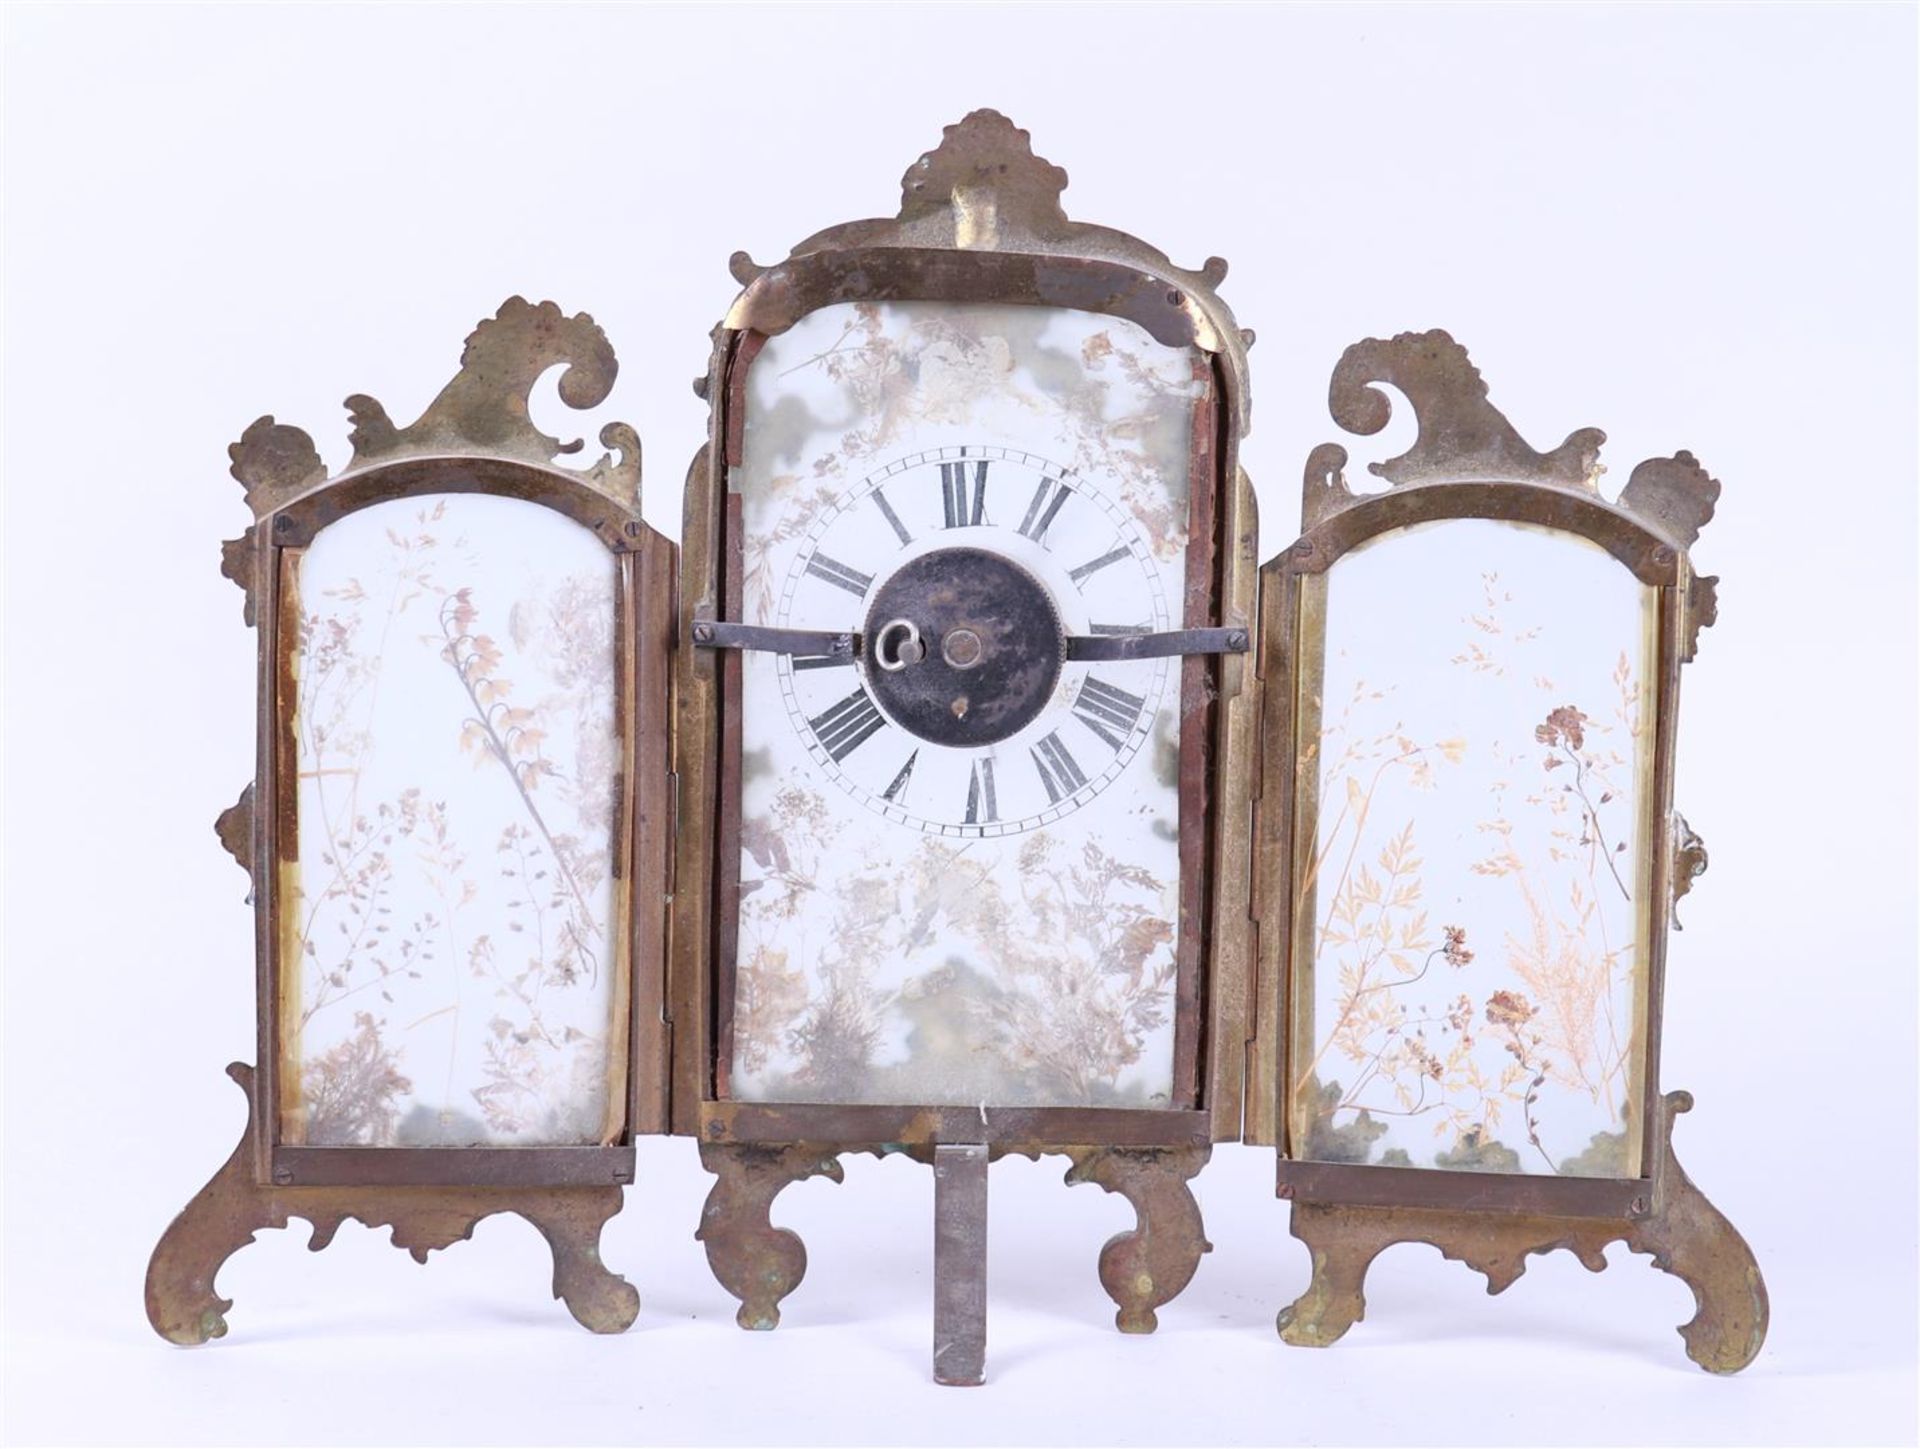 Louis XV-Style Three-Strike Alarm Clock with Dried Flowers Behind Glass (Approx. 1880) - Image 2 of 2